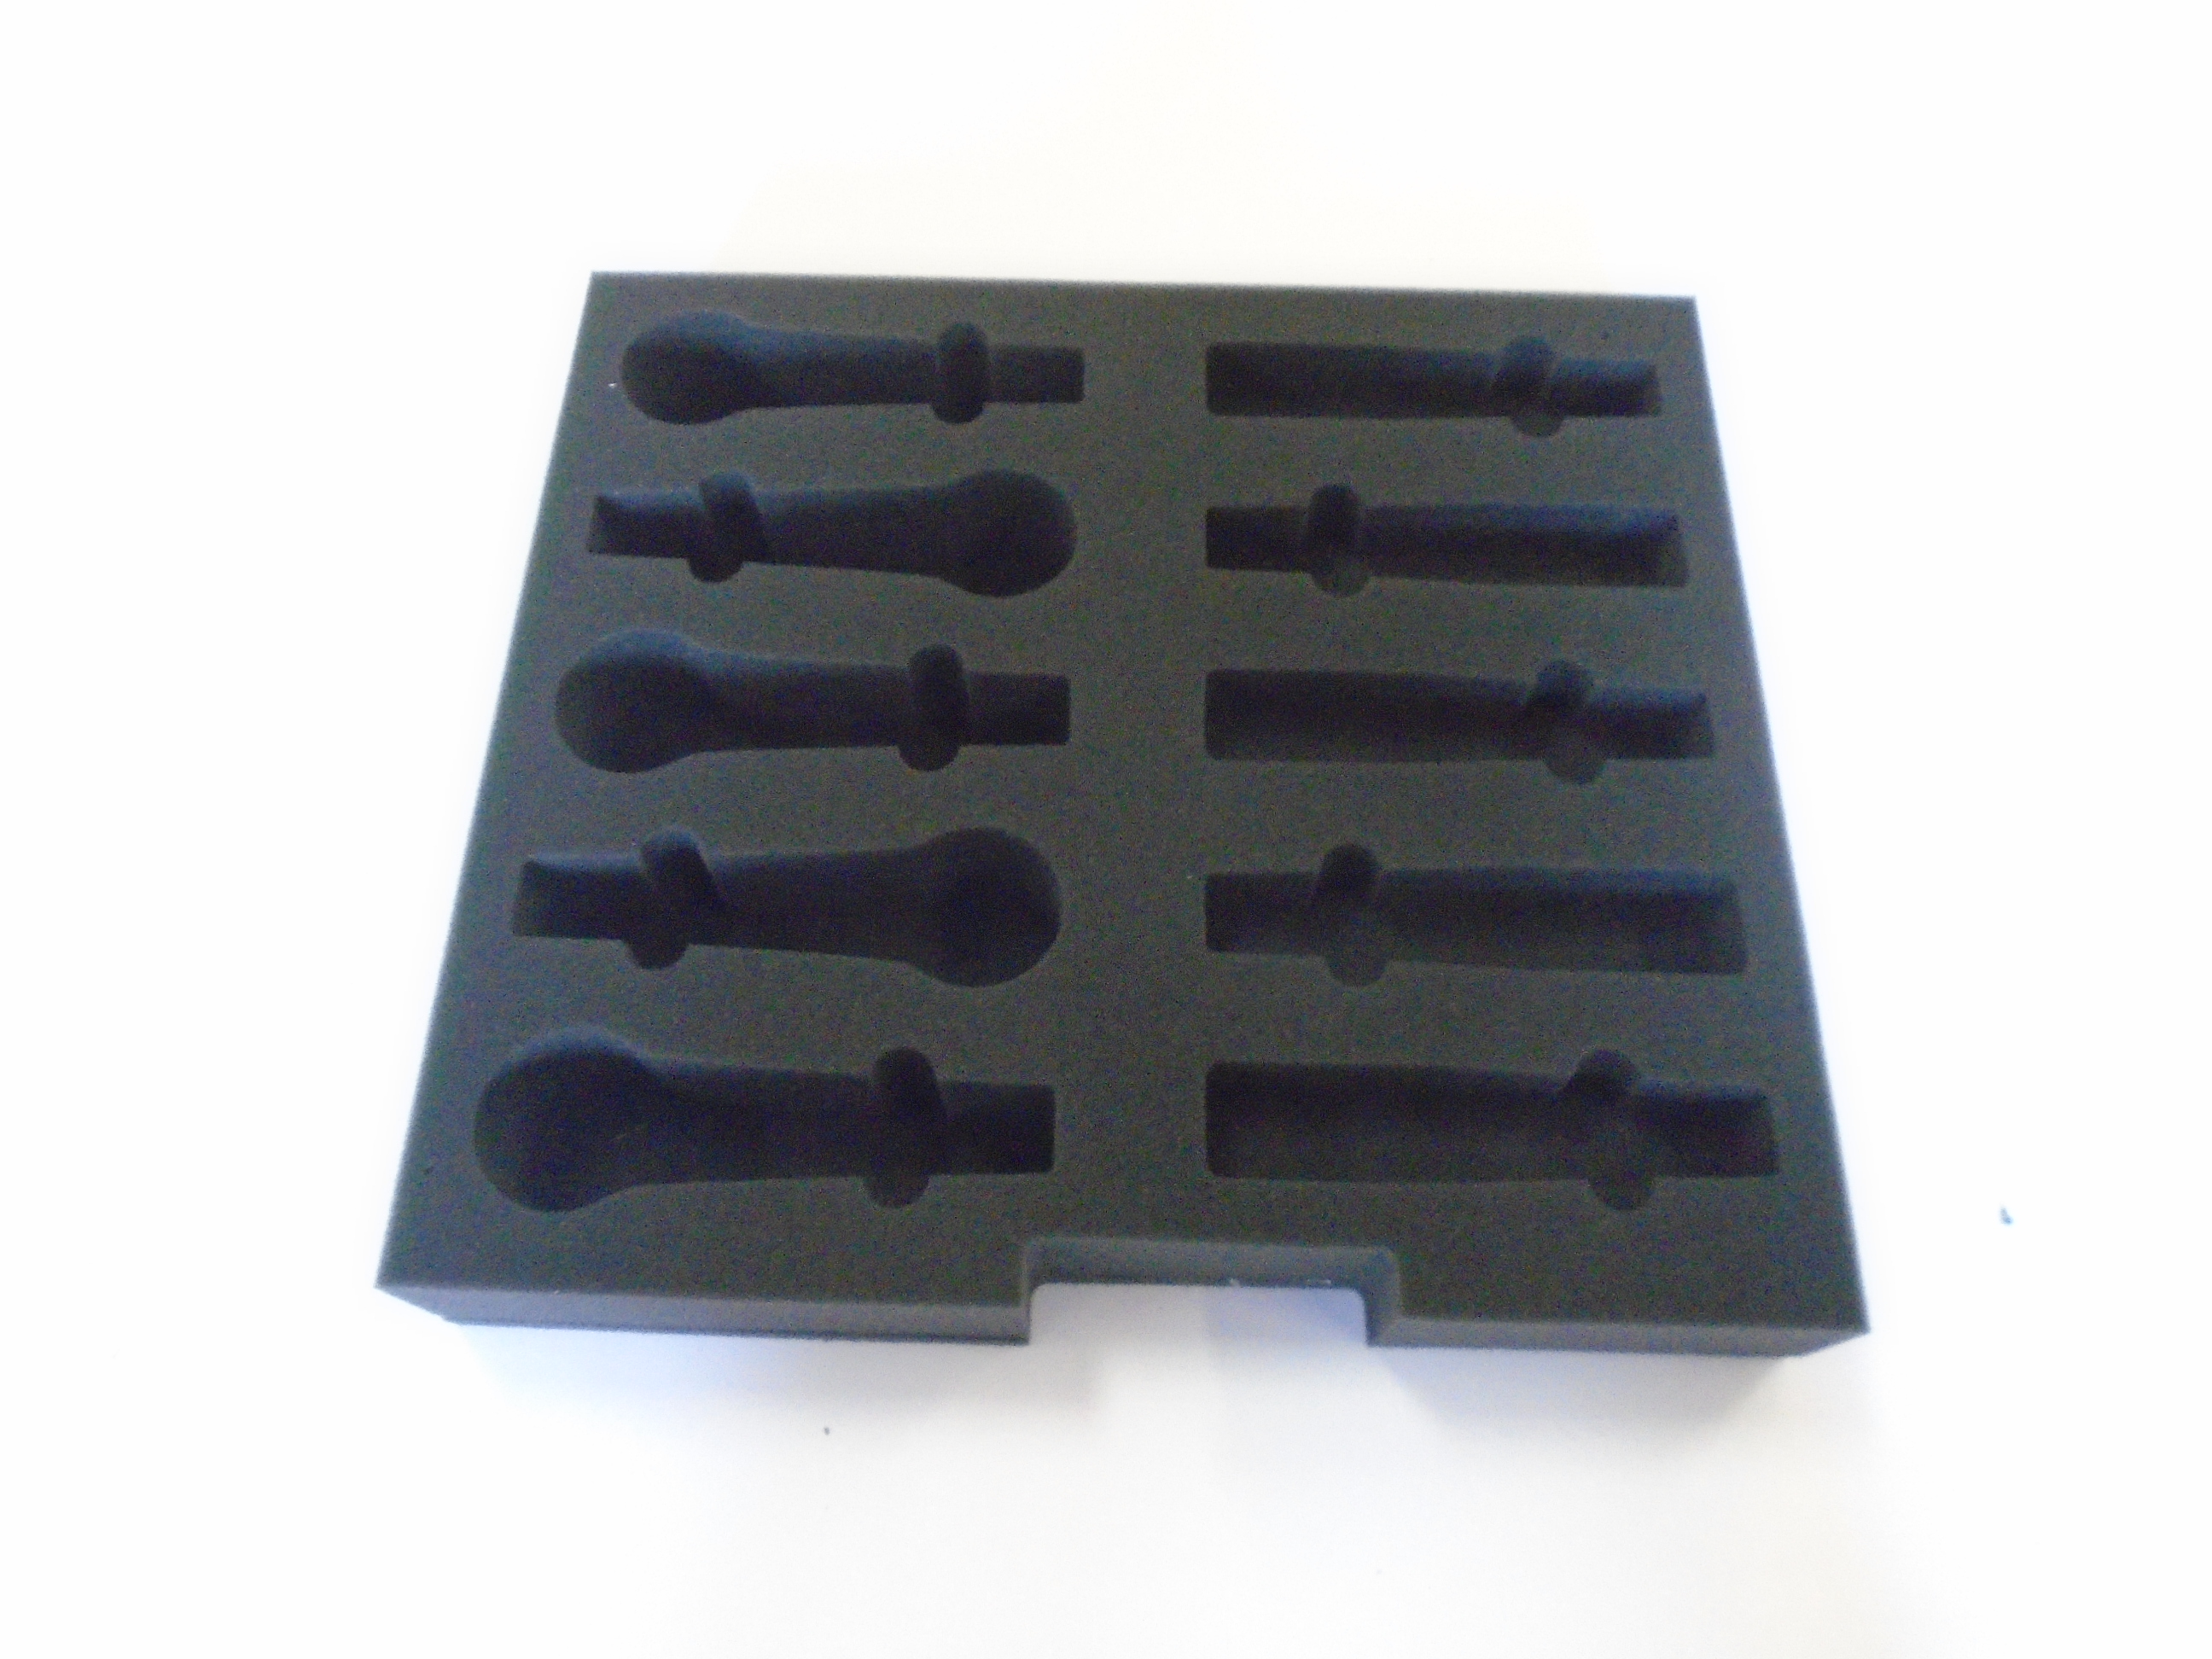 Print # 8533 - Custom 2-RU Foam Insert for 5-Pack Shure SM58 + 5-Pack Shure SM57 Wired Microphone Kit By Nelson Case Corp